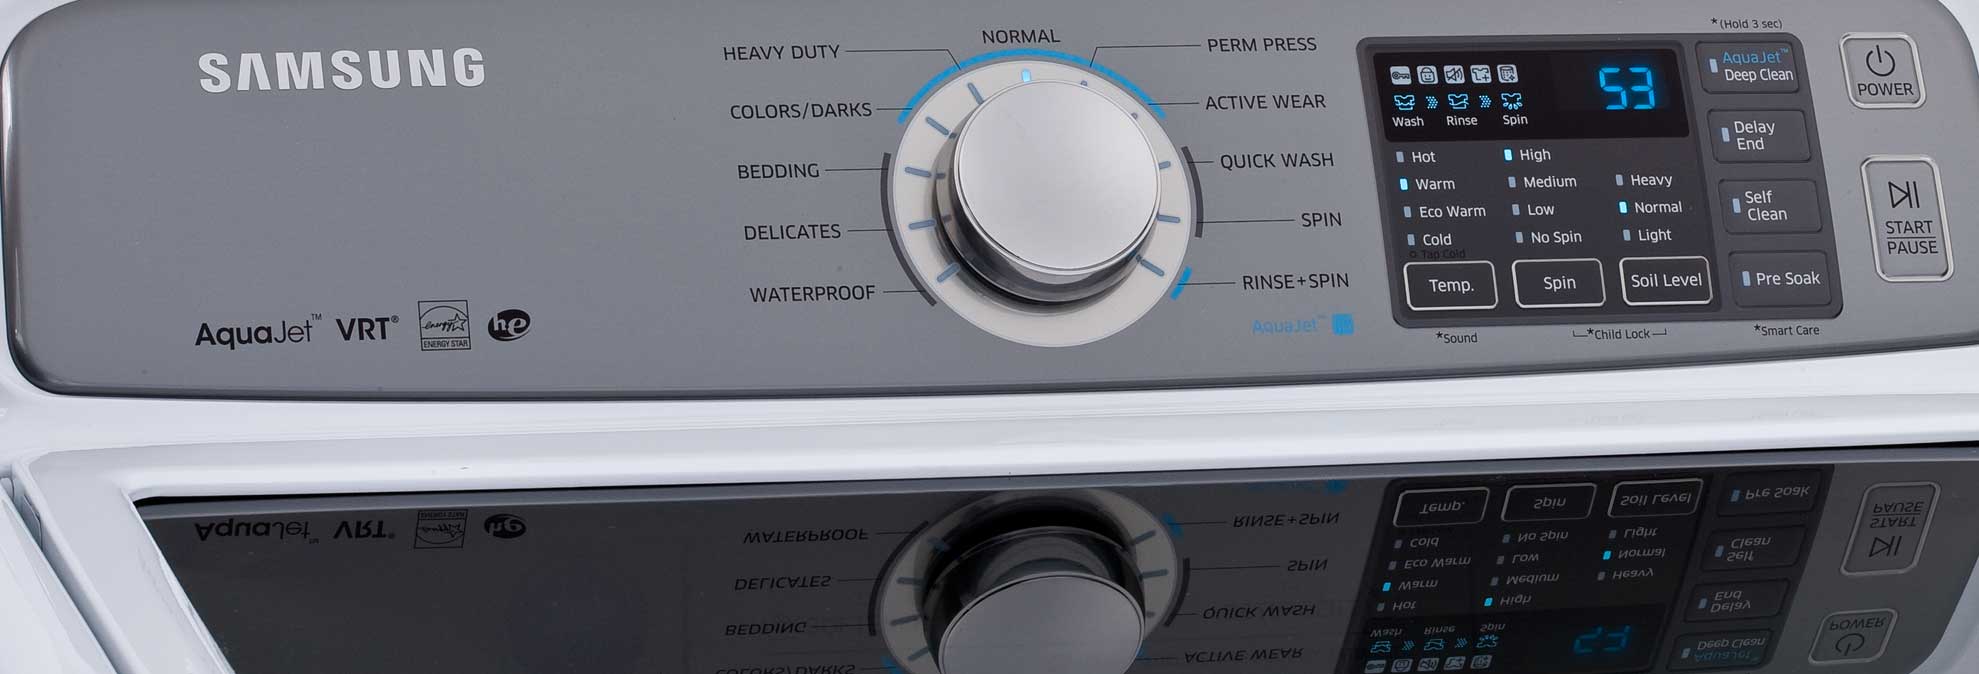 What are common reasons for washing machine recalls?